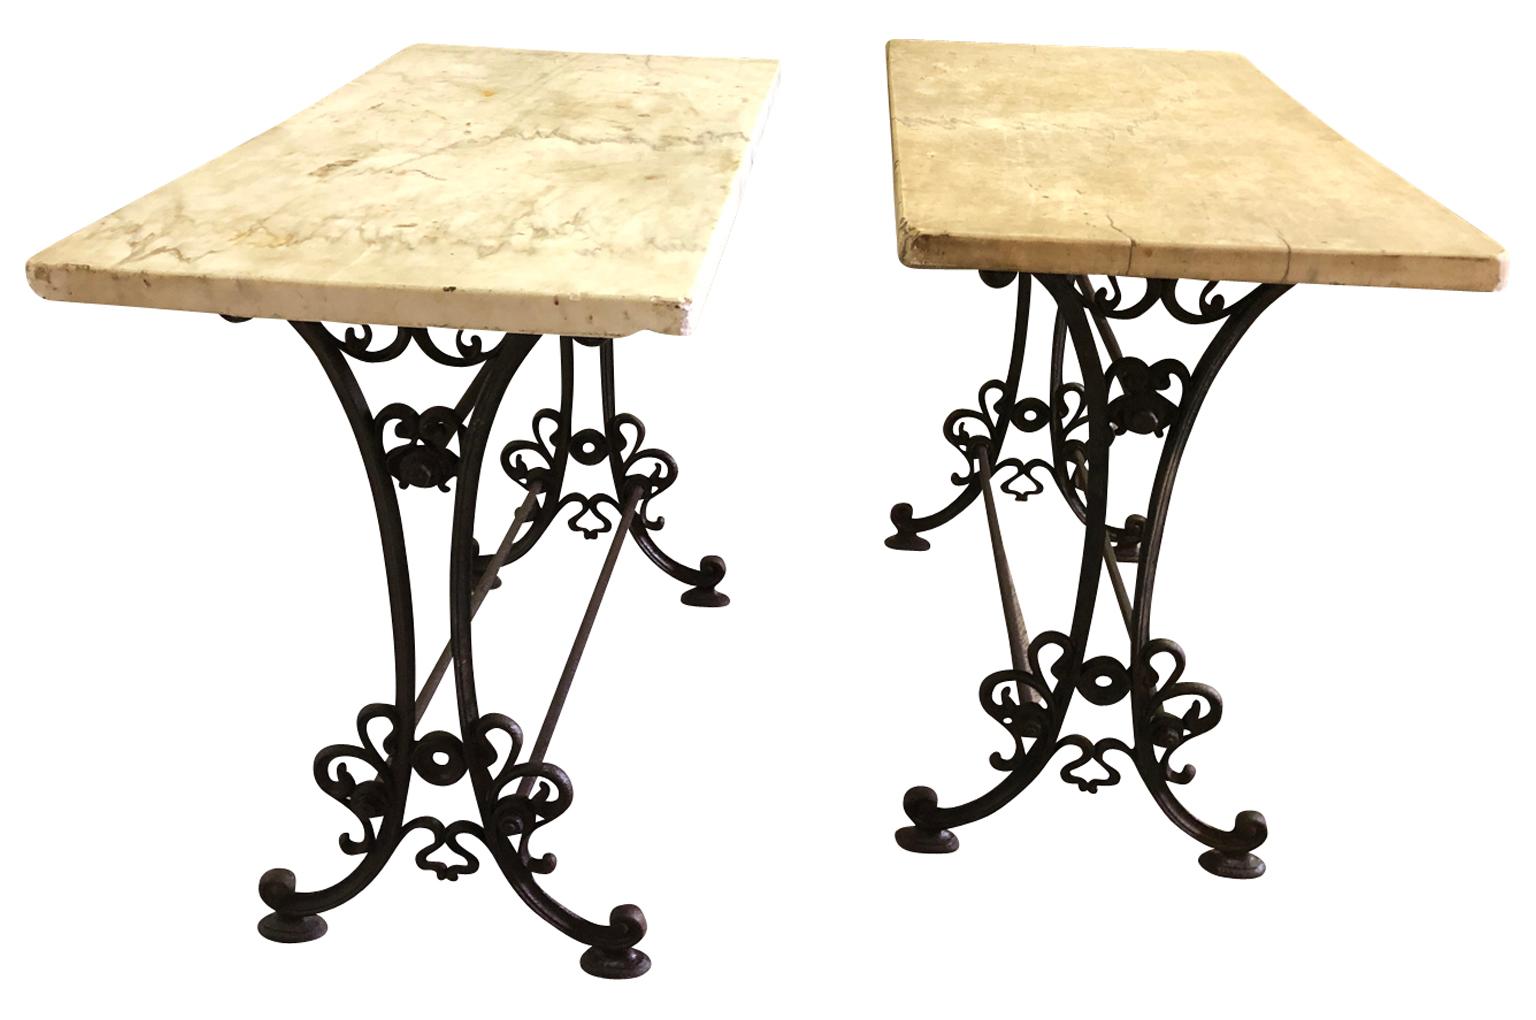 A very charming pair of mid-19th century Bistro Tables from the Provence region of France. Wonderfully constructed with beautiful cast iron bases and original marble tops. Perfect for any interior or garden.